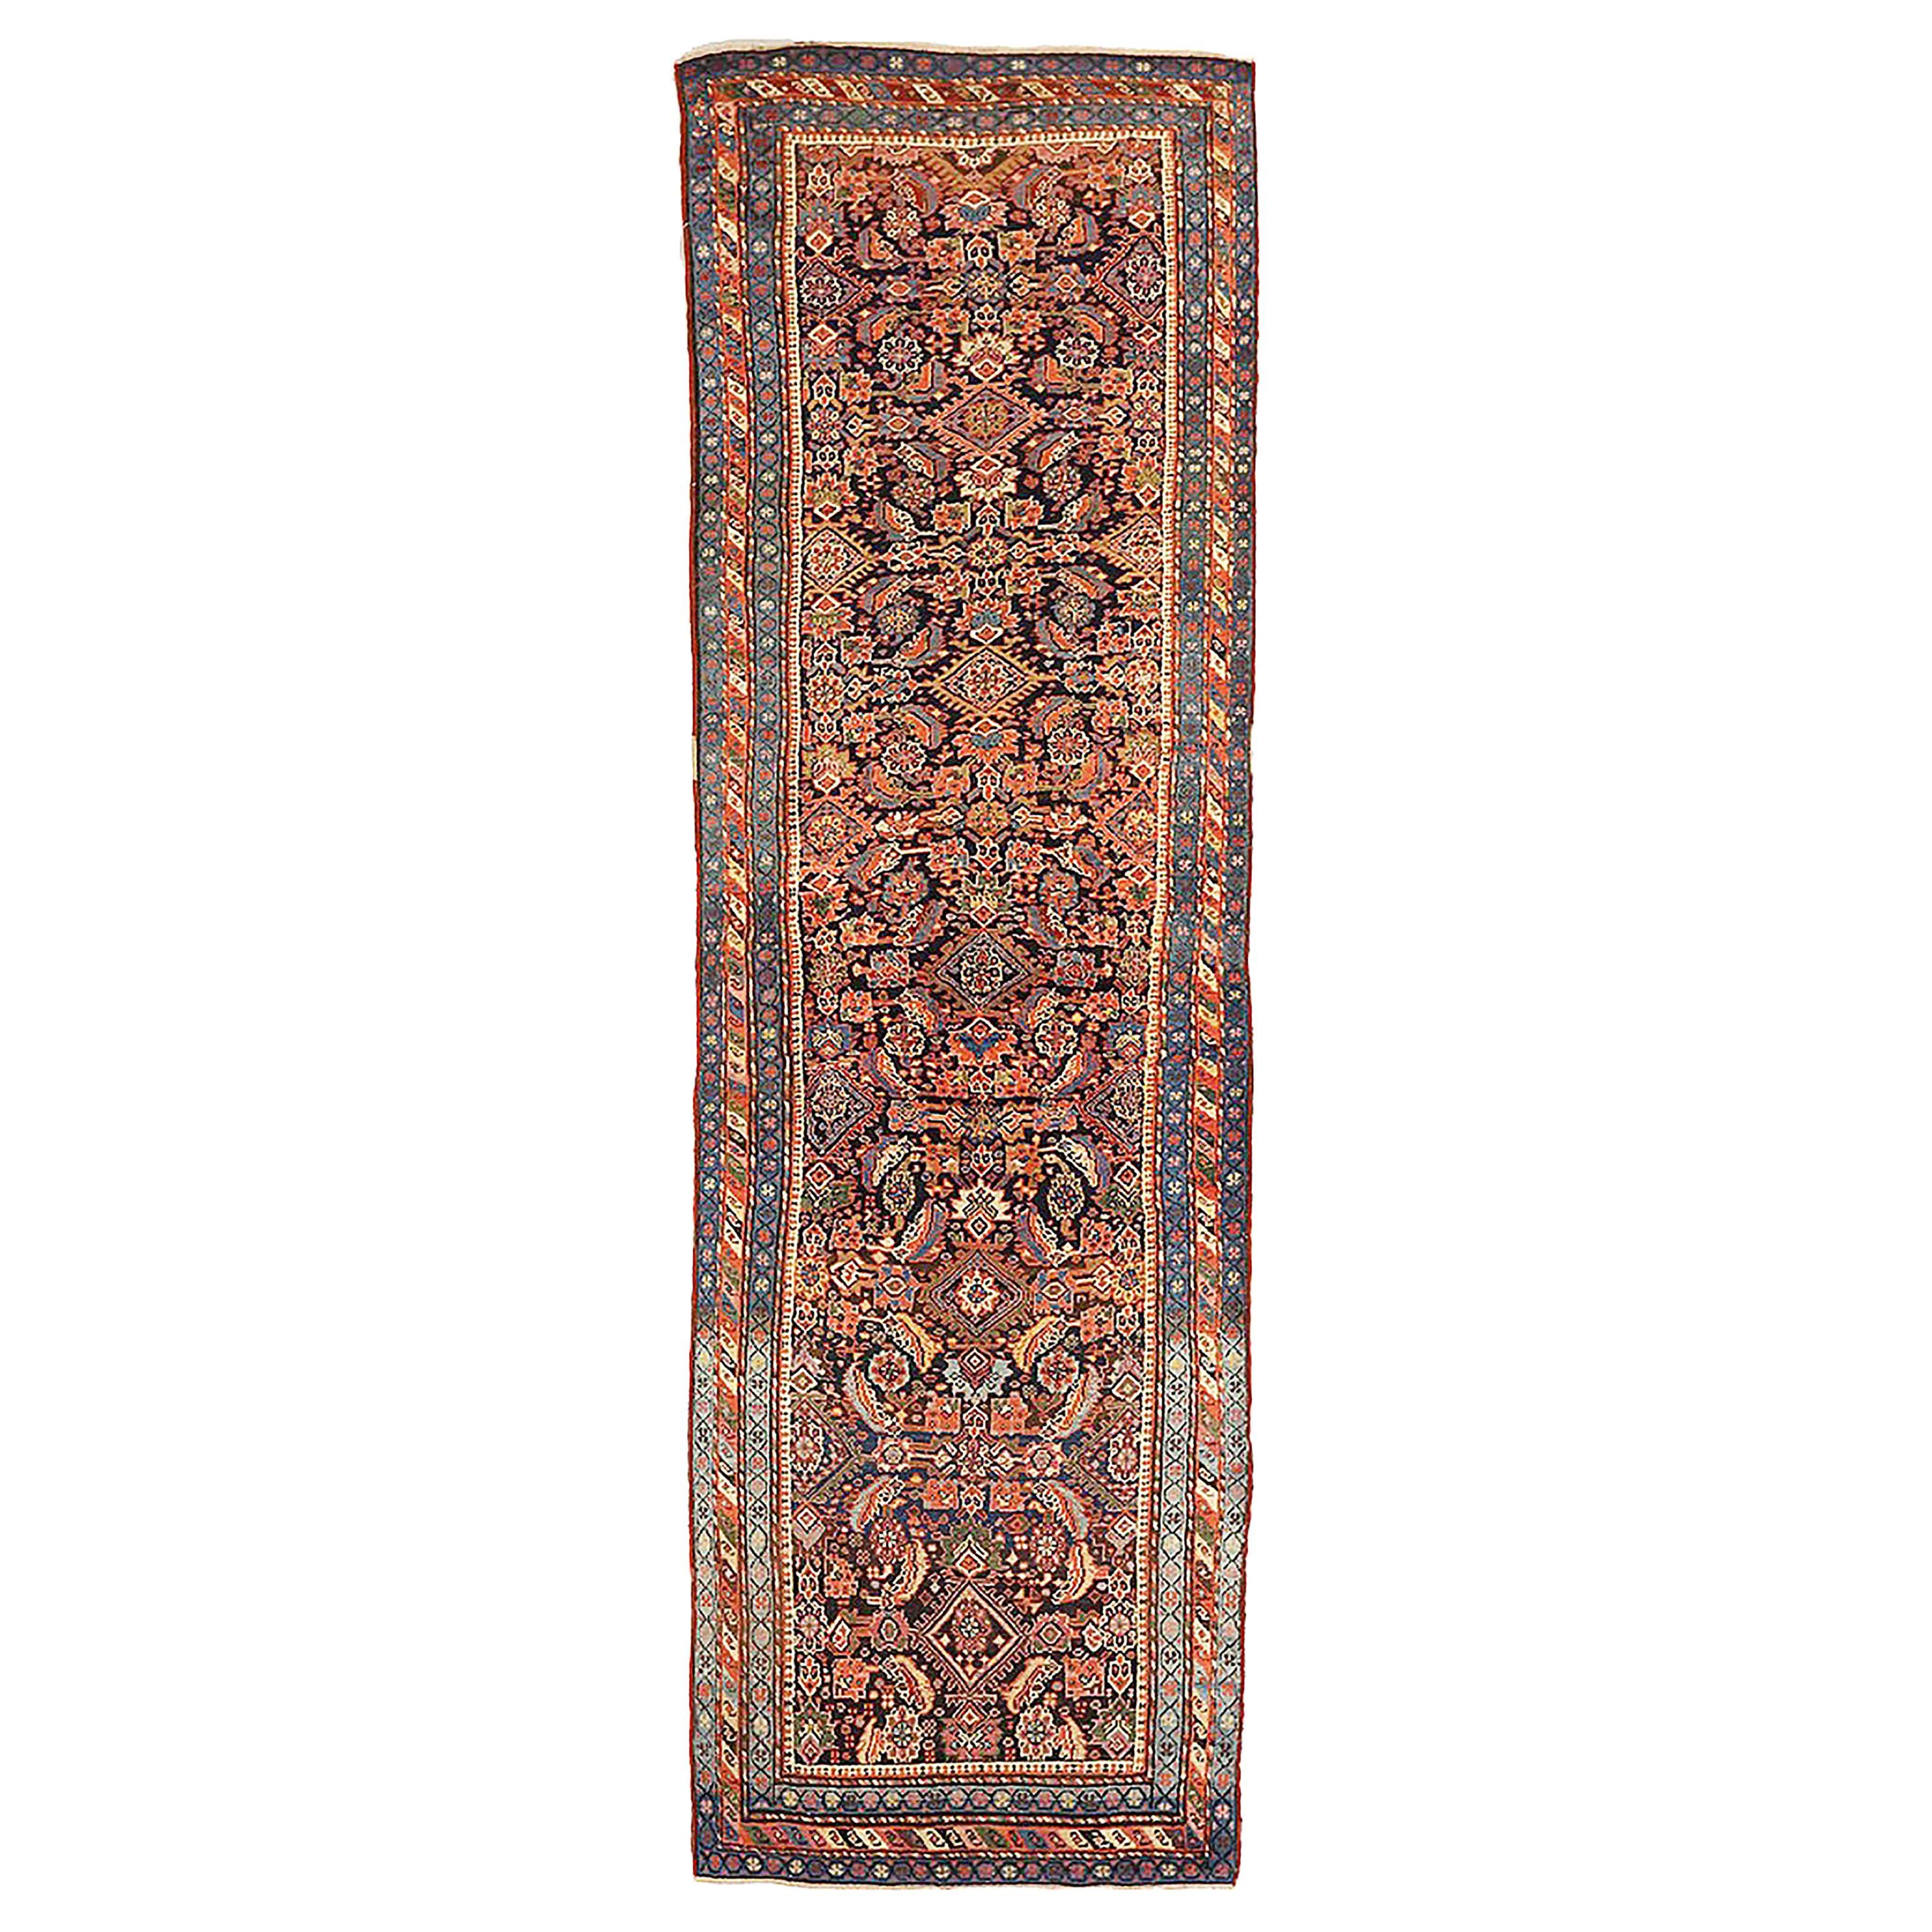 Antique Persian Azerbaijan Runner Rug with Ivory and Blue Floral Details For Sale